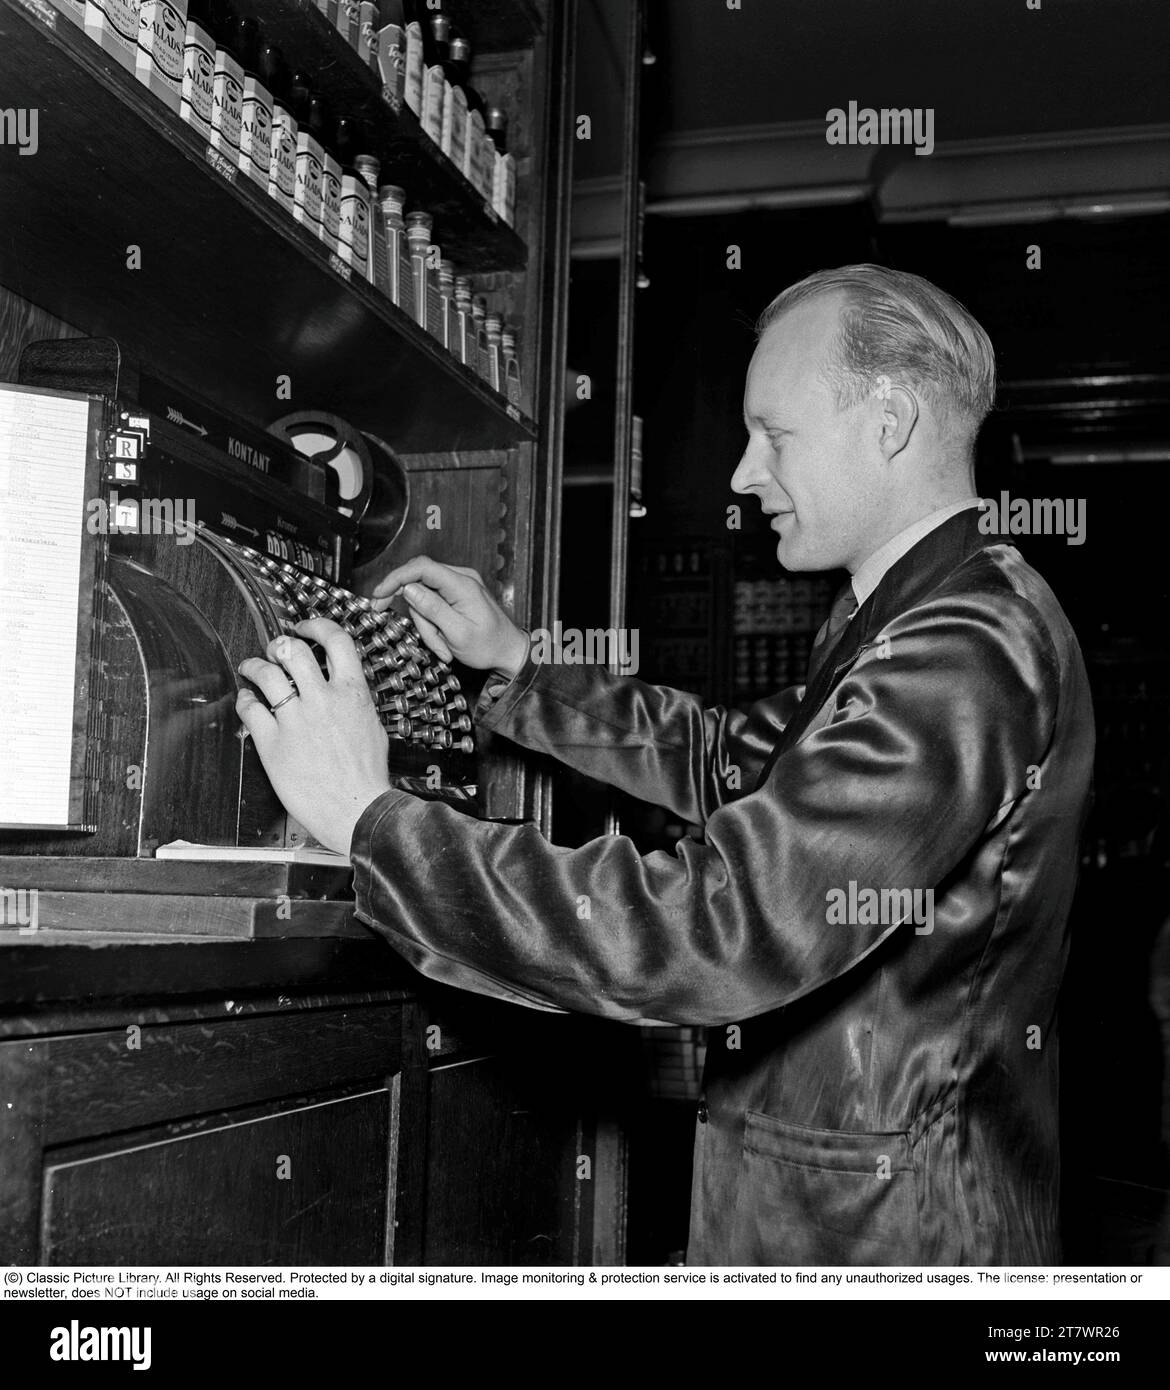 In the 1940s. A man at a cash register. 1942 ref Kristoffersson A122-6 Stock Photo